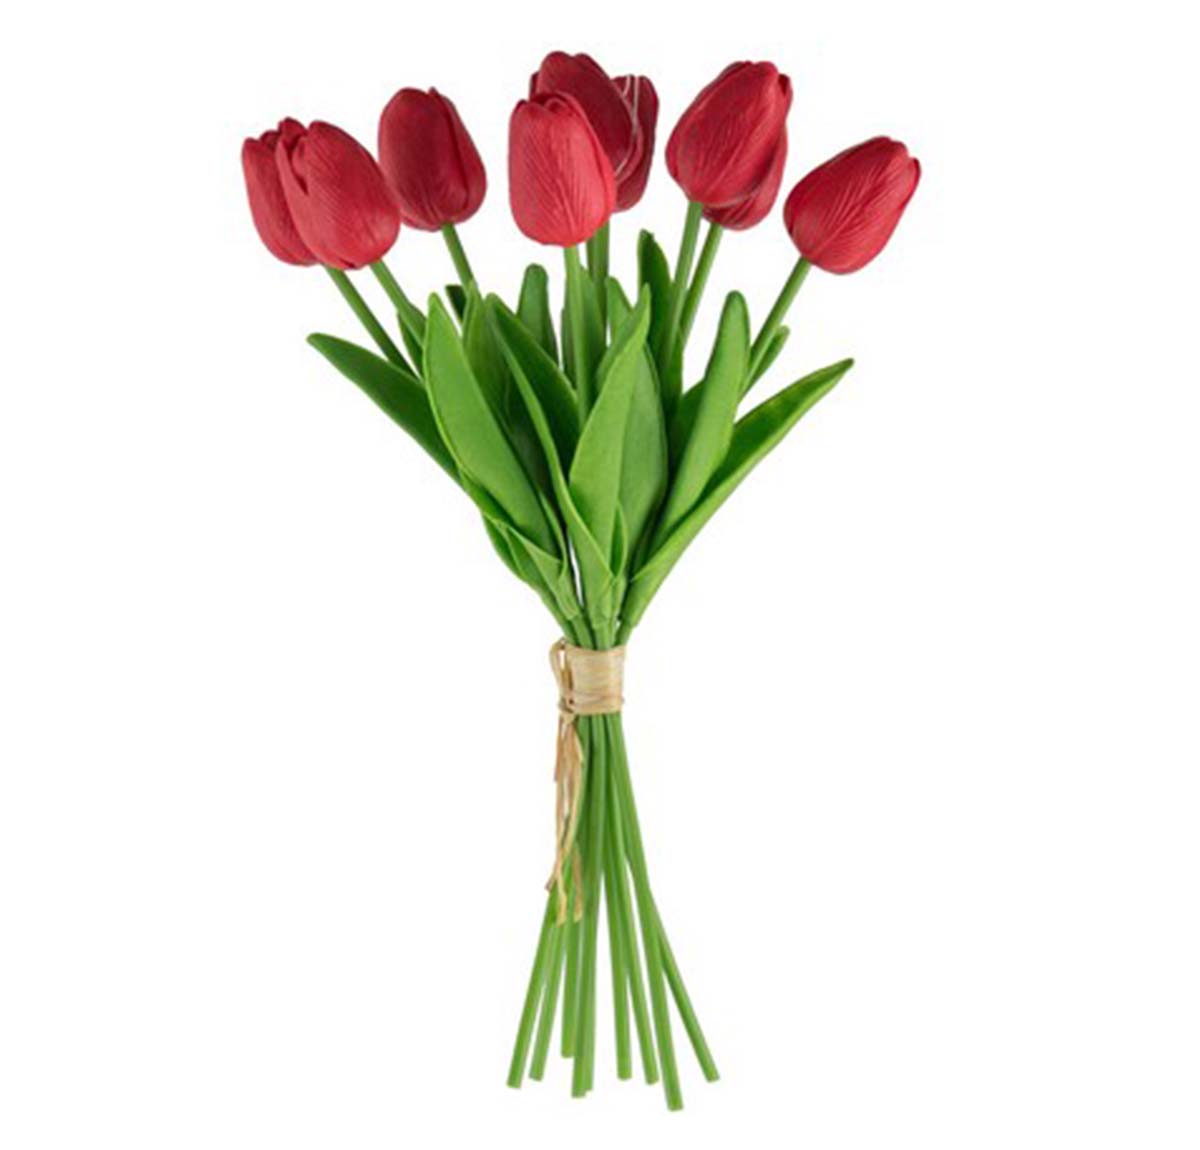 Artificial 9-Stem Red Tulips Bunch | Plants & Flowers | Home Decor